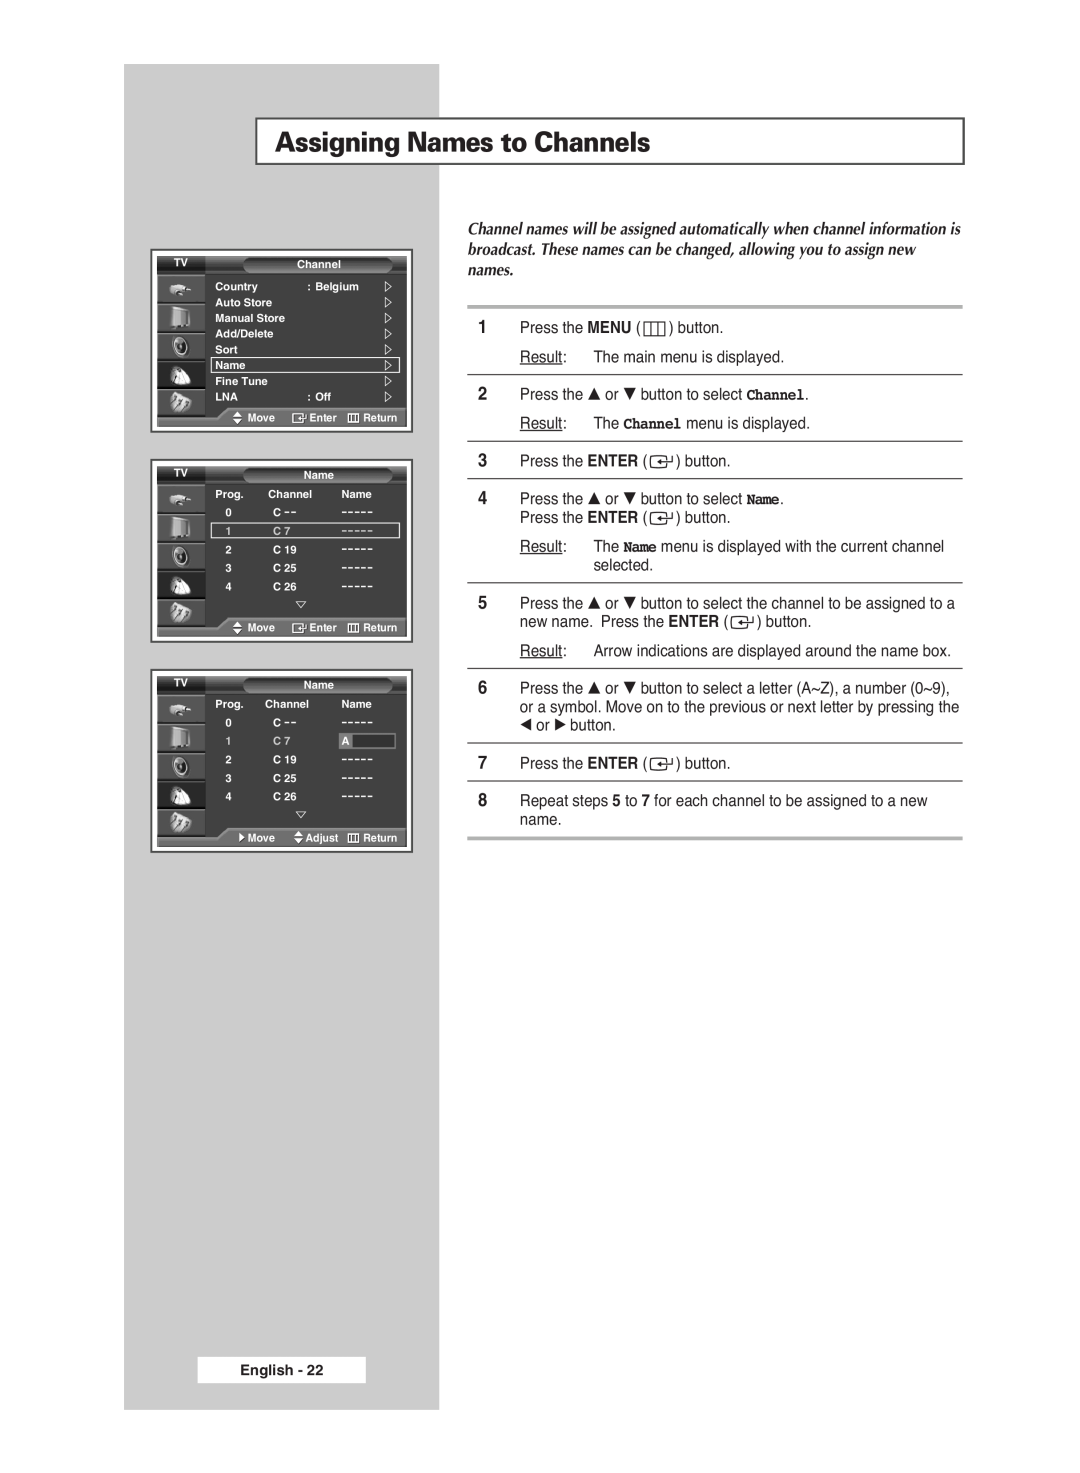 Samsung PS-42S5S manual Assigning Names to Channels, Adjust 